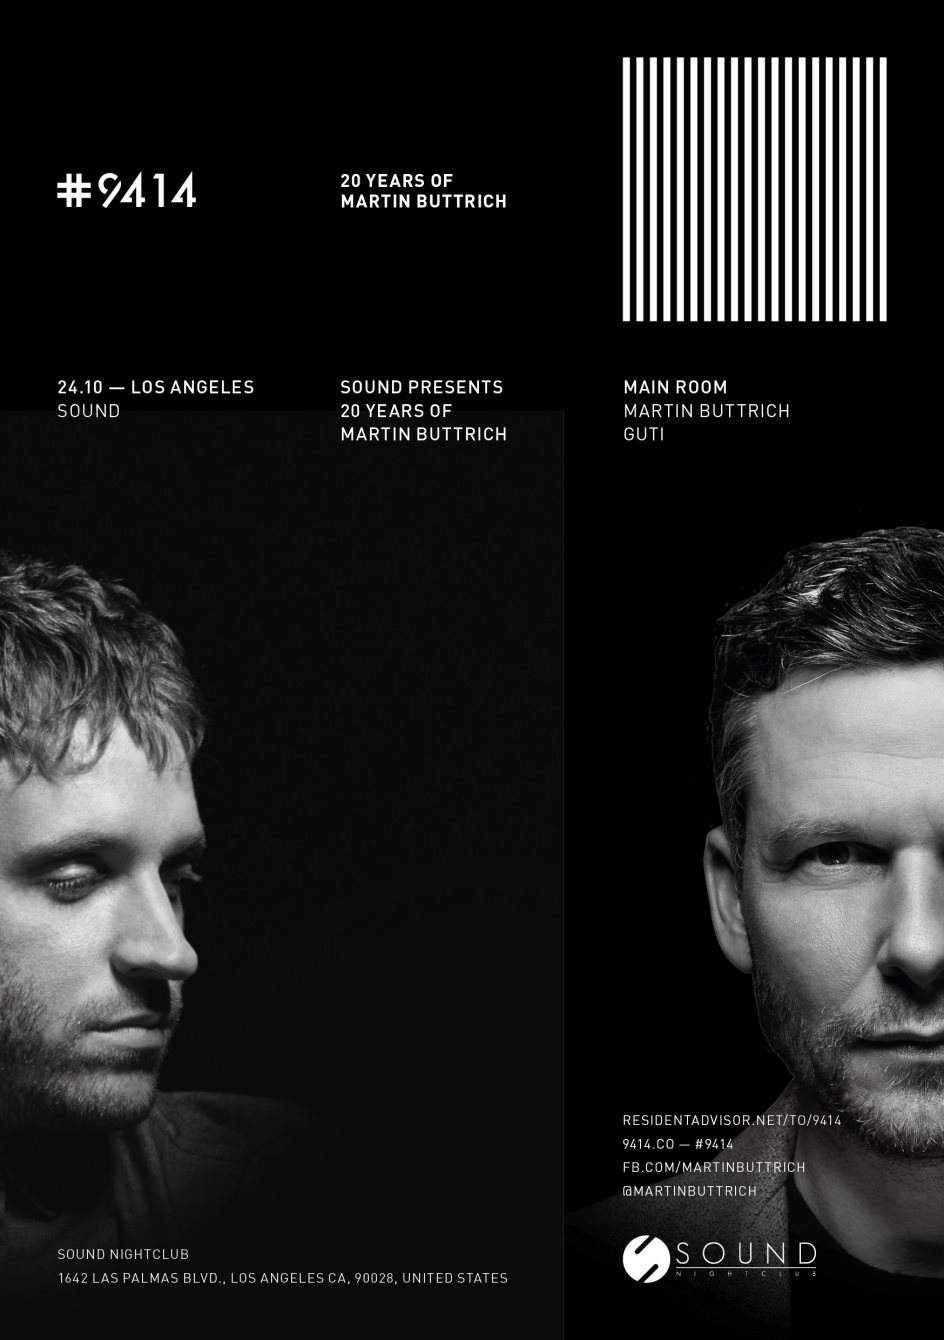 #9414 20 Years of Martin Buttrich with Guti - Página frontal